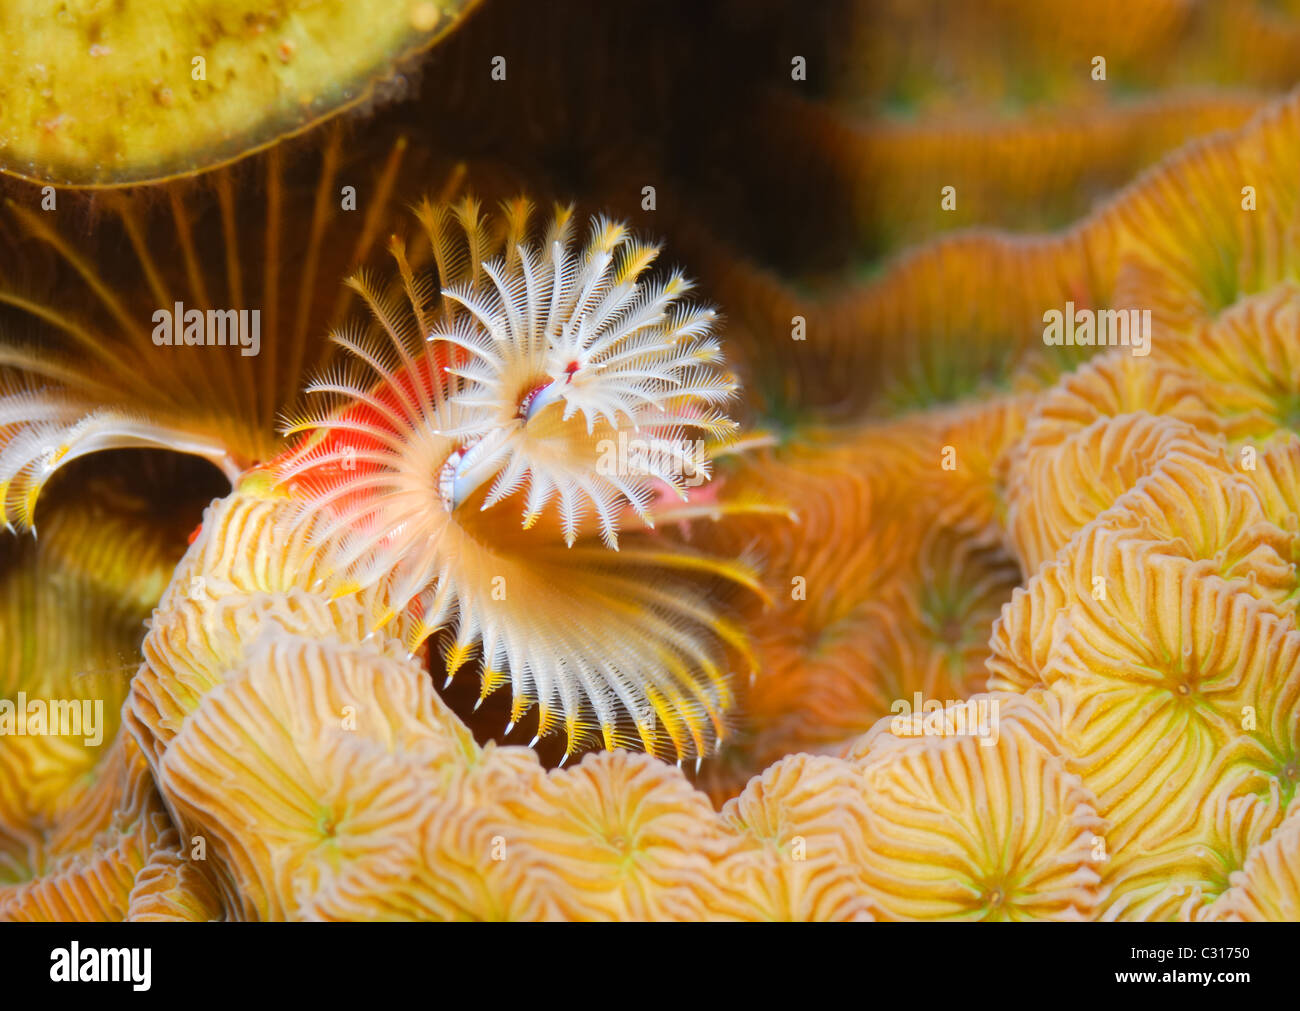 Super-sharp beautiful coral reef scene showing high-resolution tiny hairs of a tube worm on brain coral. Stock Photo